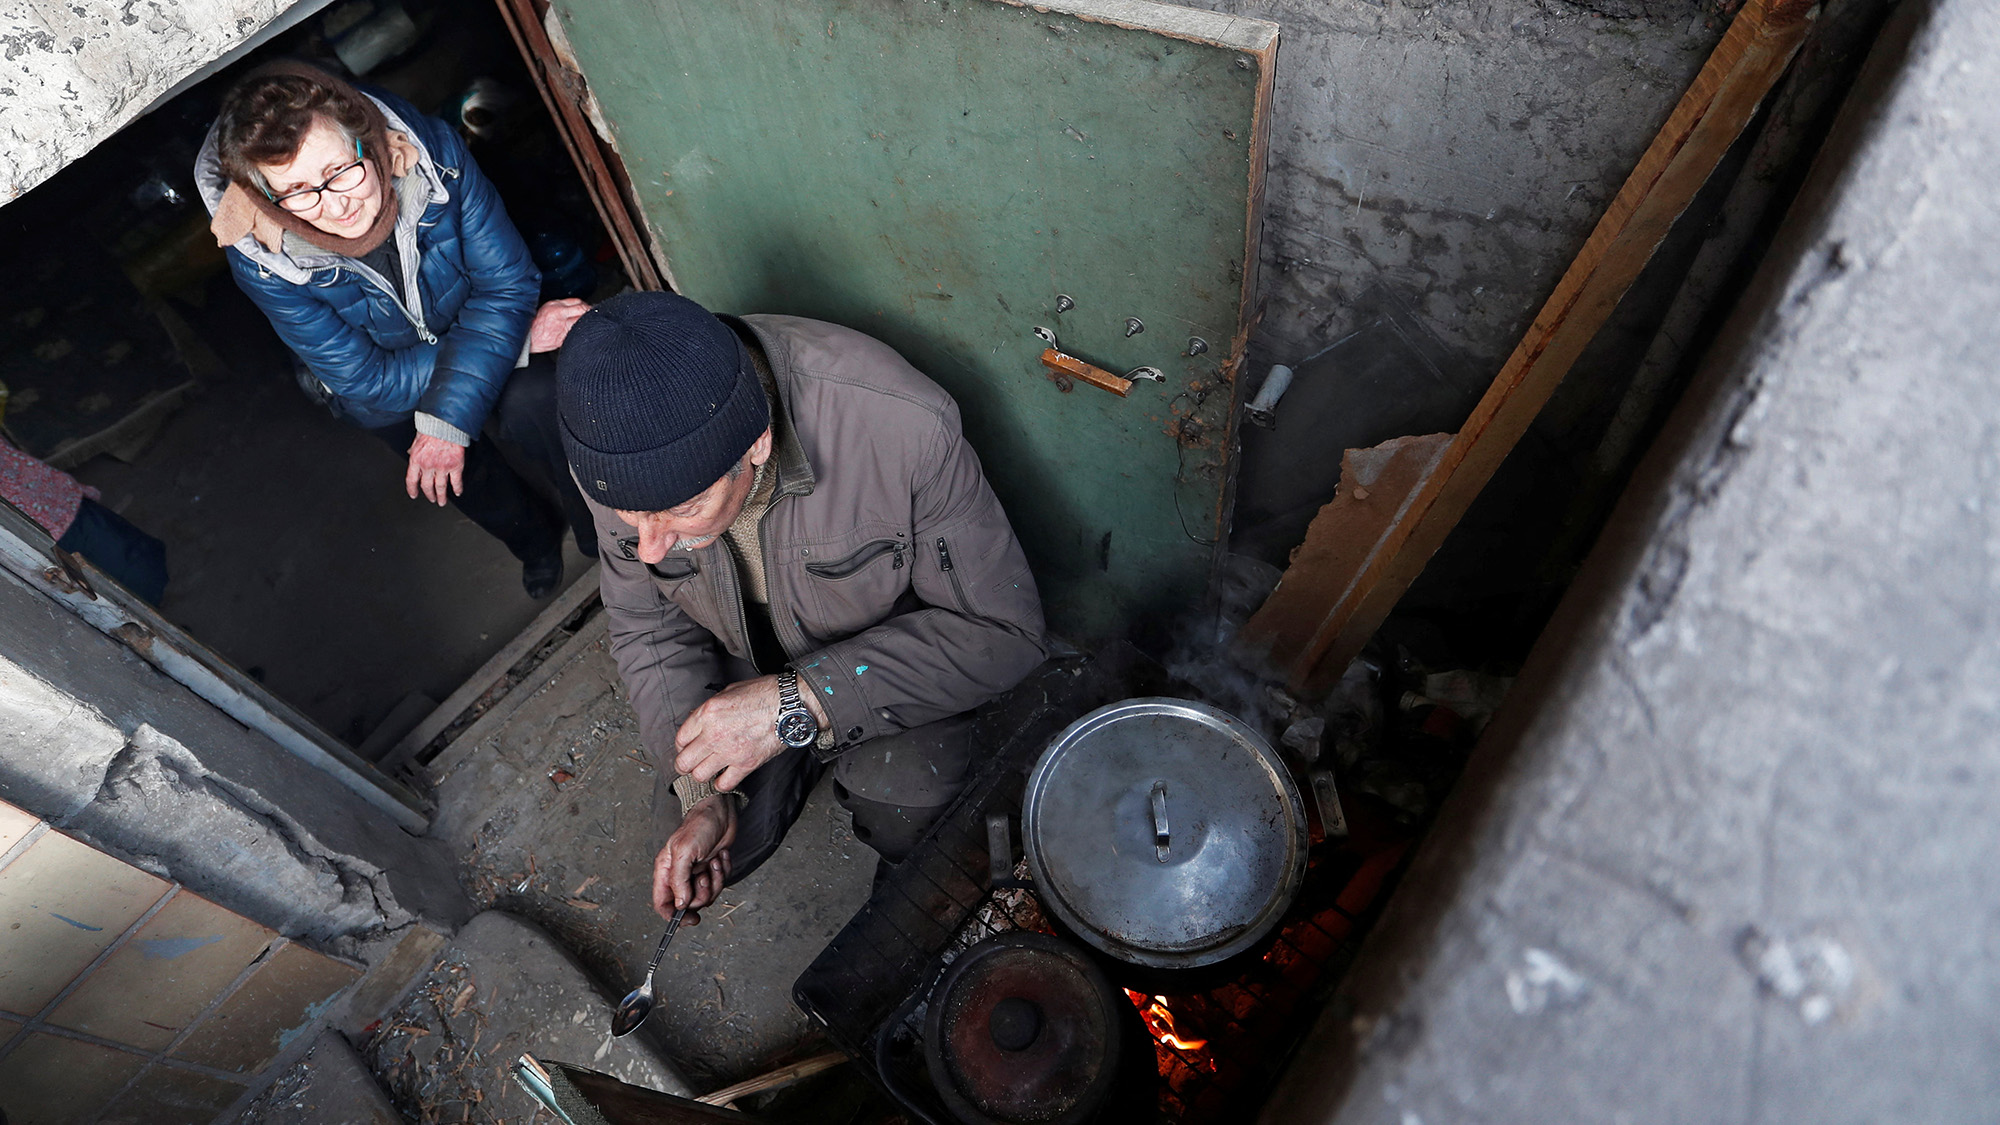 Lyudmila, 71, and Viktor, 63, cook food at the entrance to the basement of an apartment building in the besieged city of Mariupol, Ukraine on March 30.